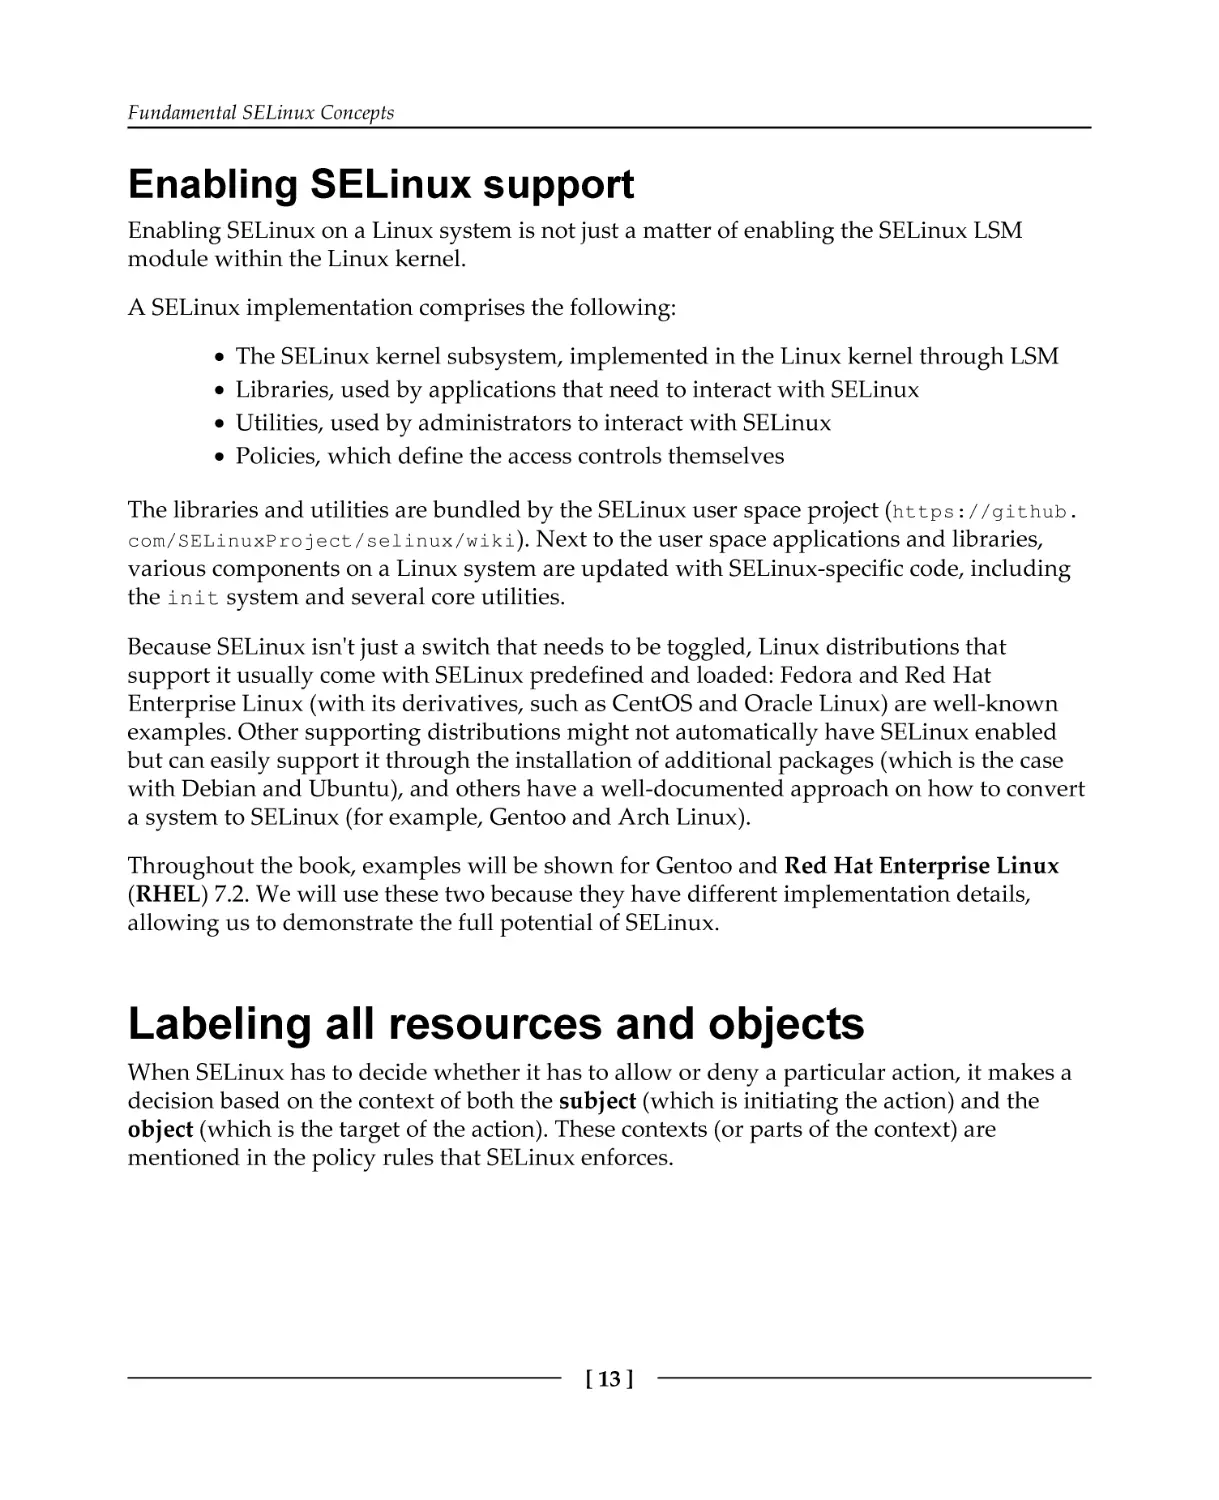 Enabling SELinux support
Labeling all resources and objects